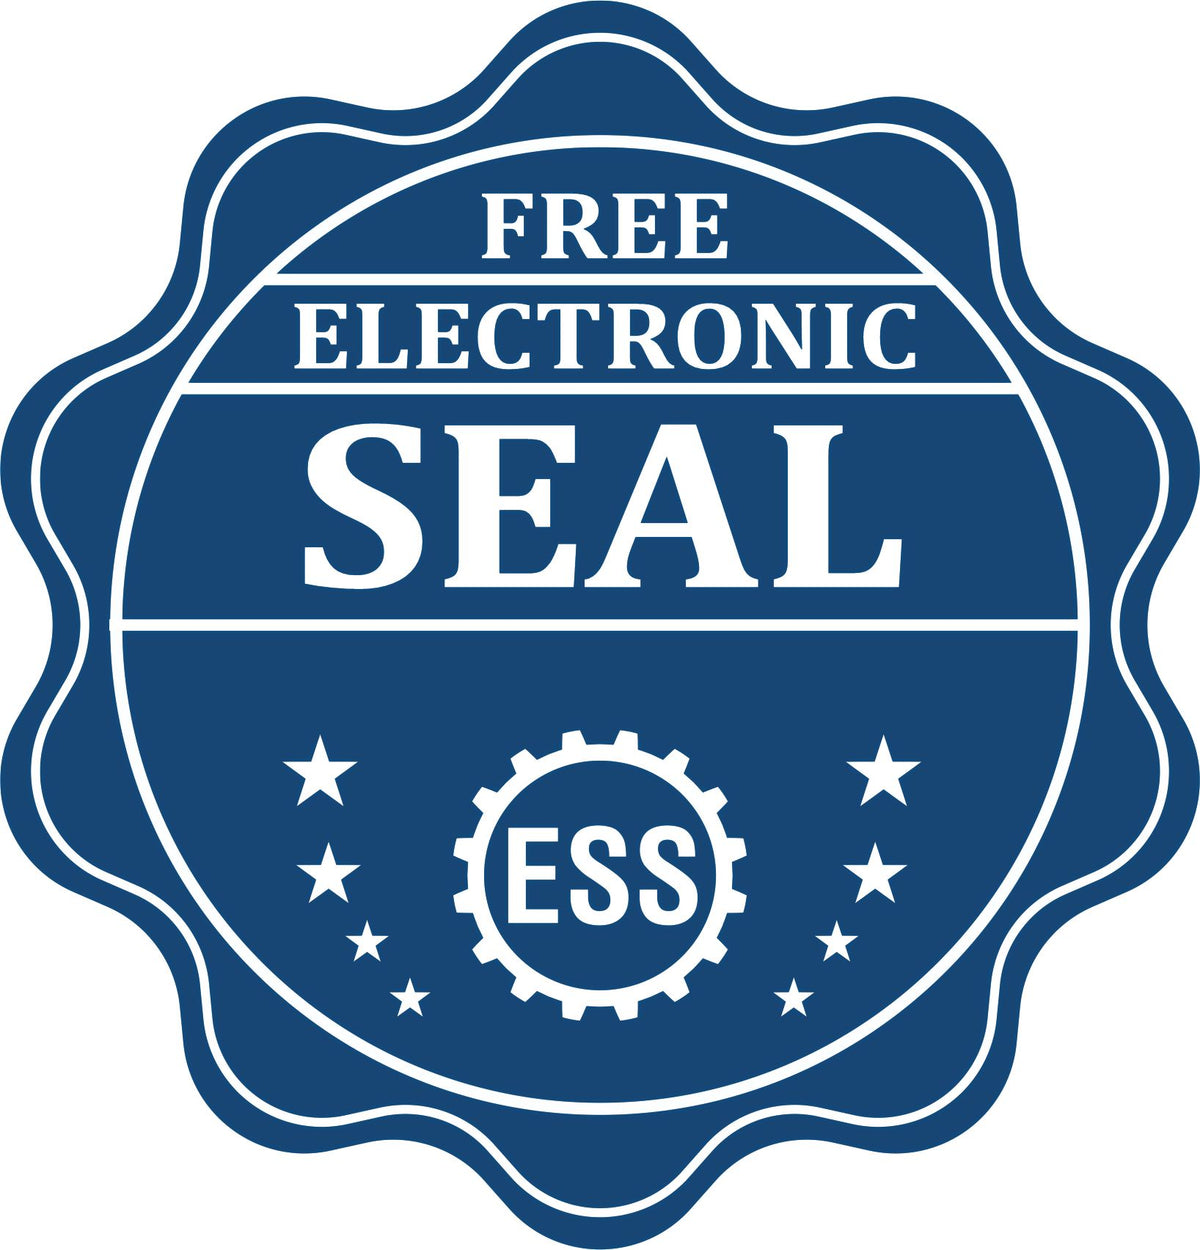 A badge showing a free electronic seal for the Gift Idaho Engineer Seal with stars and the ESS gear on the emblem.